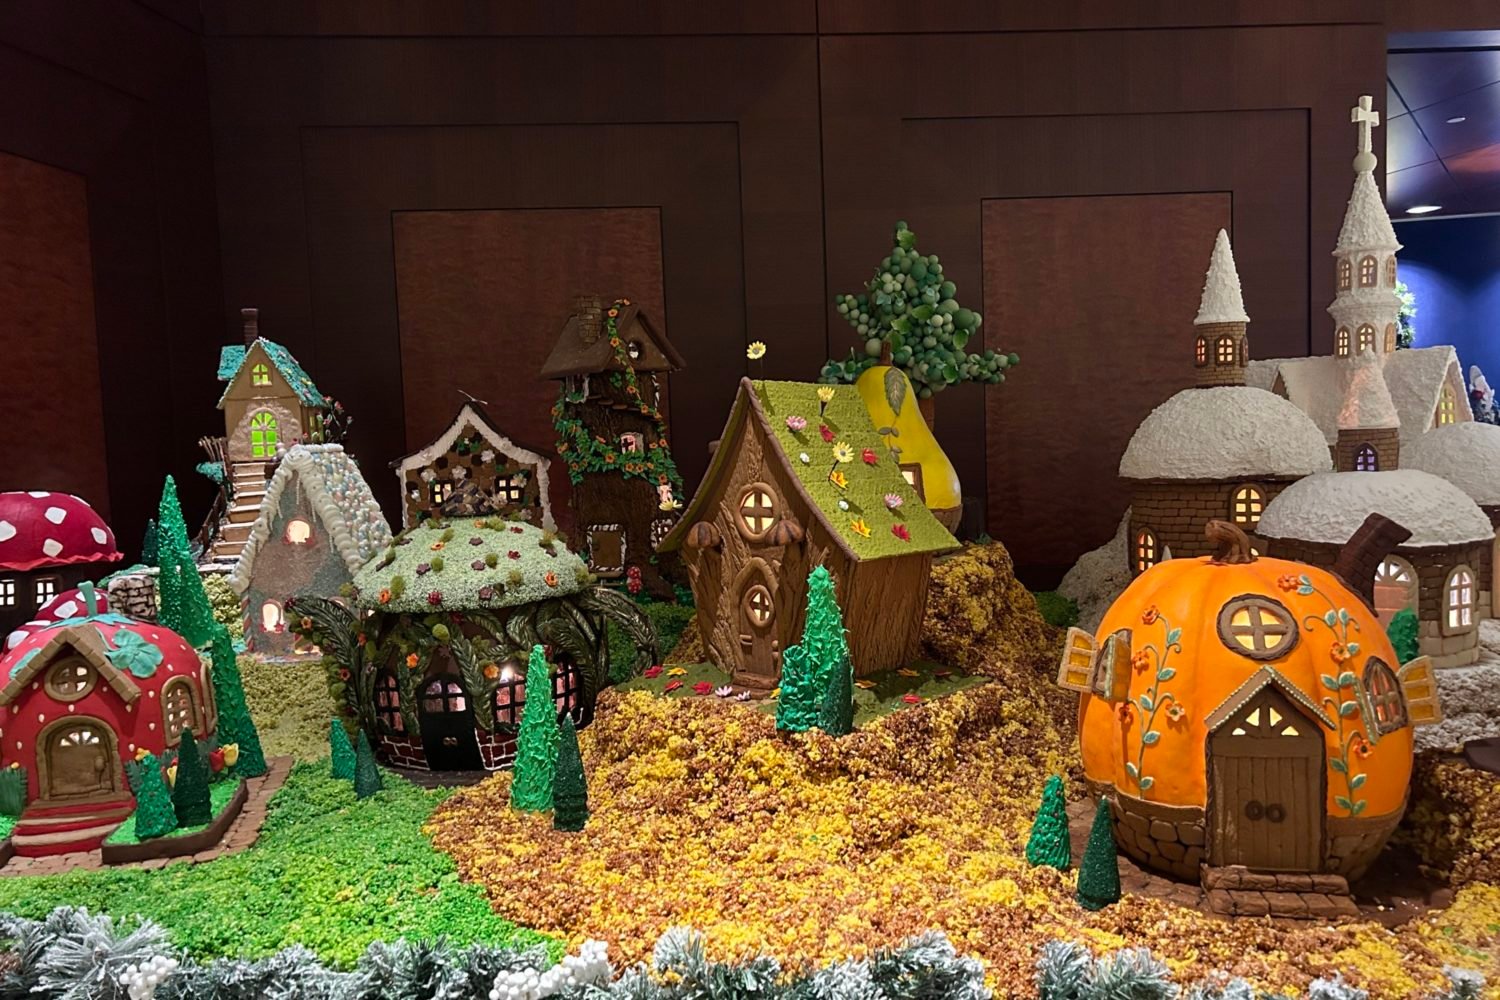 The fairy village at Gaylord National Resort. Photo courtesy of Gaylord National Resort.